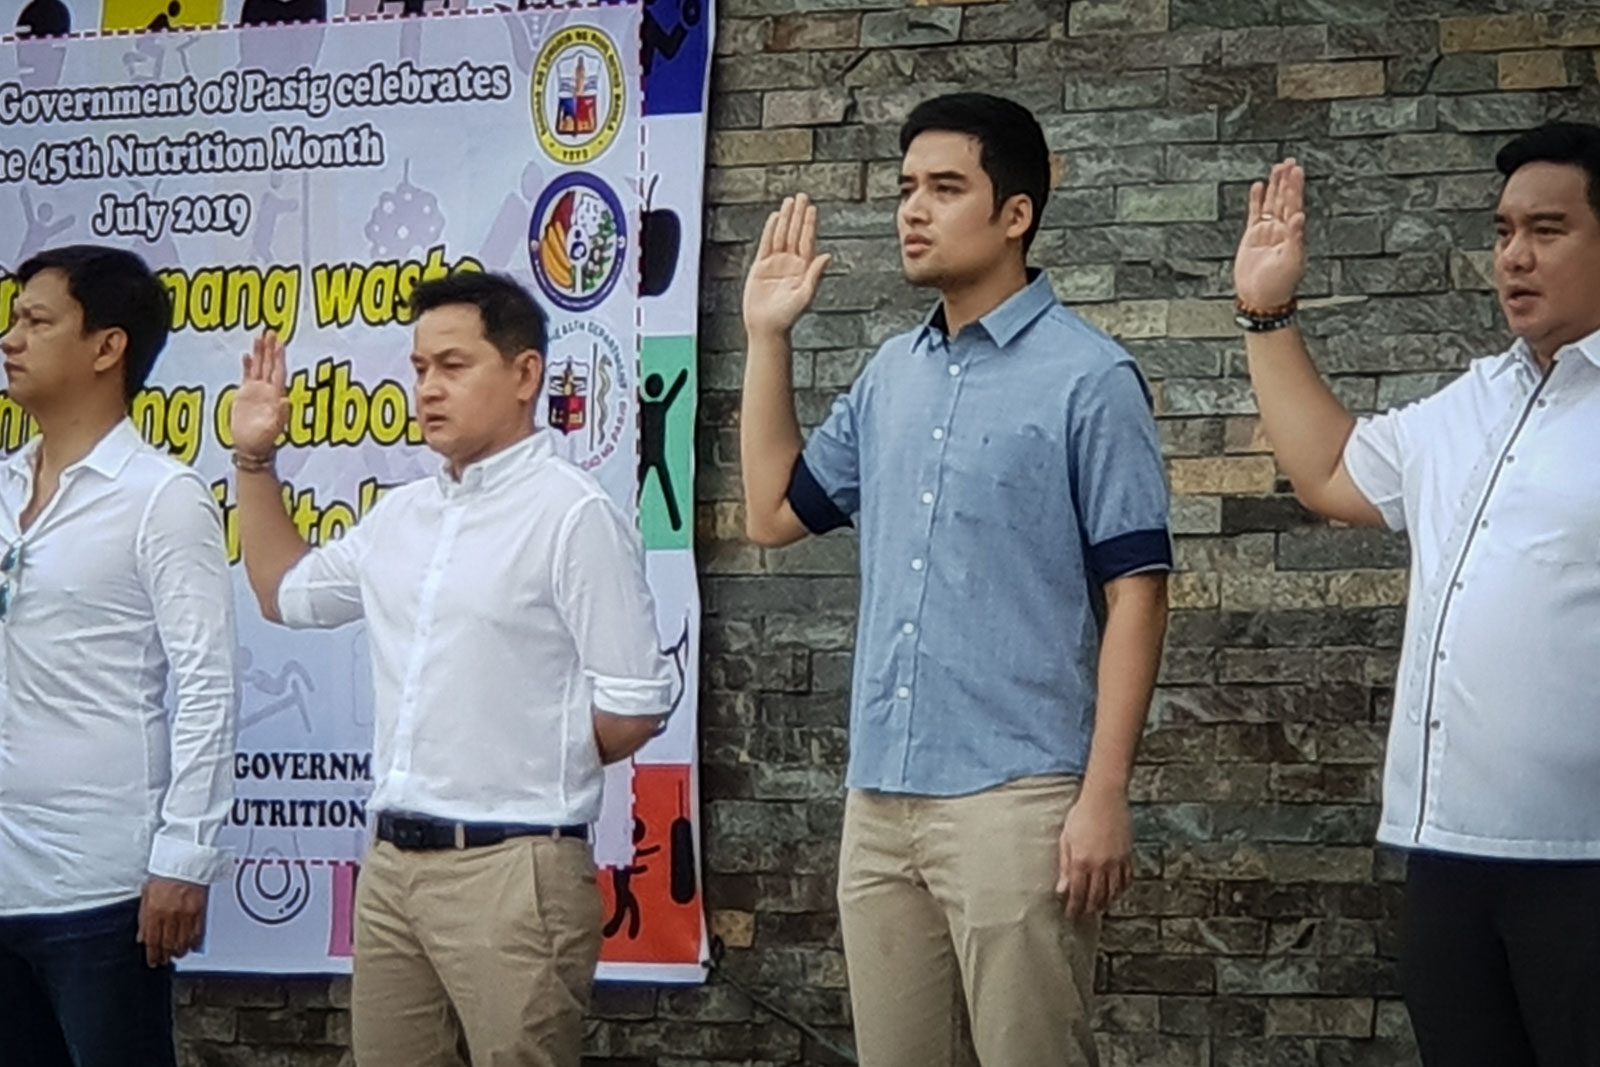 Pasig’s Vico Sotto to city hall workers: Smile even when ‘not in the mood’